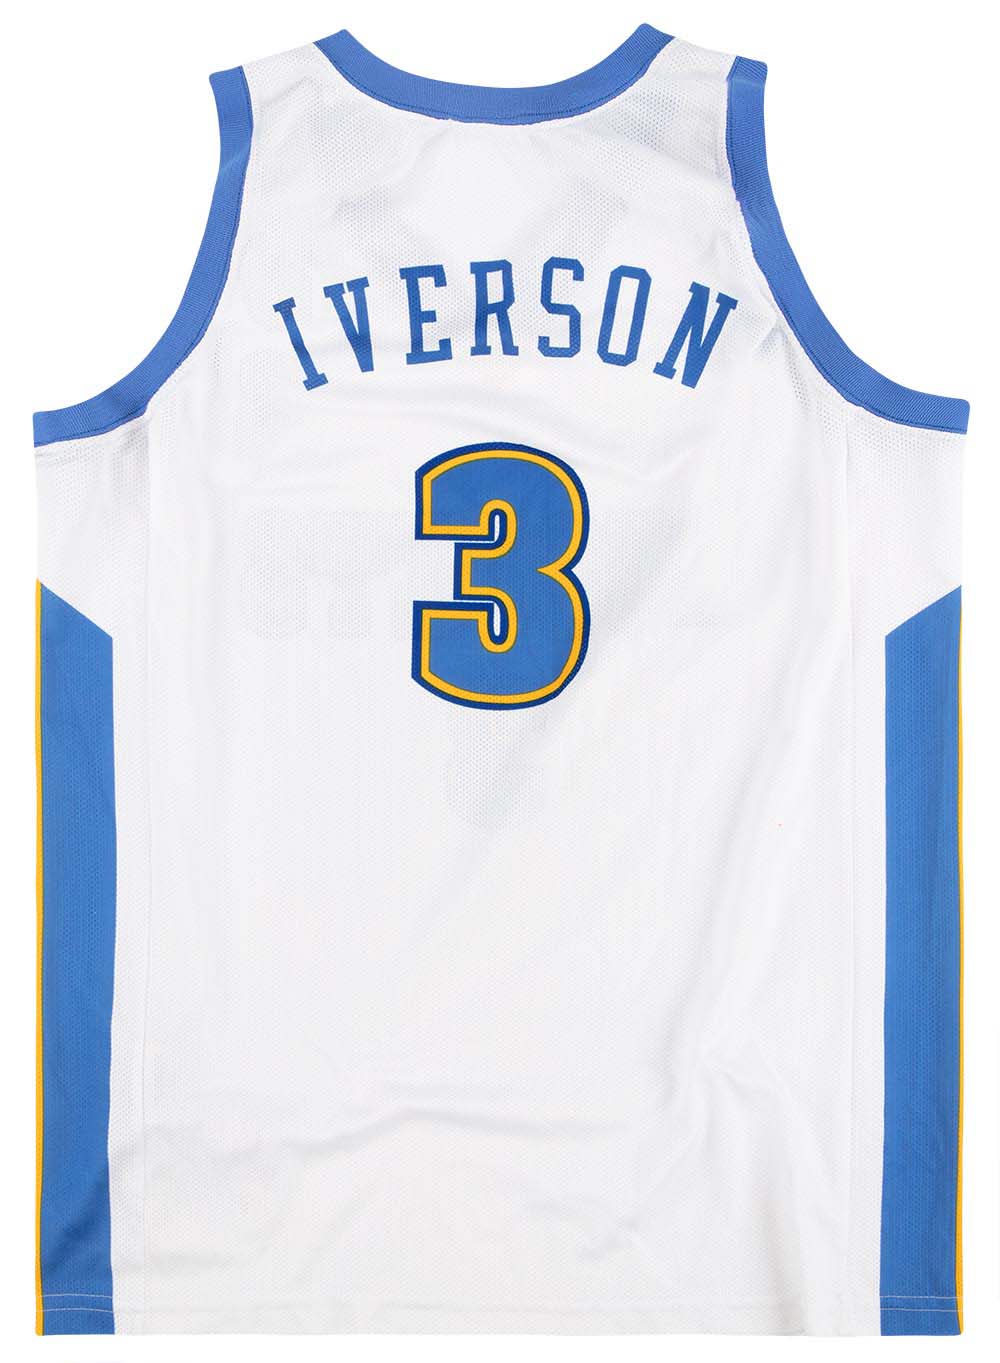 2006-08 DENVER NUGGETS IVERSON #3 CHAMPION JERSEY (HOME) S